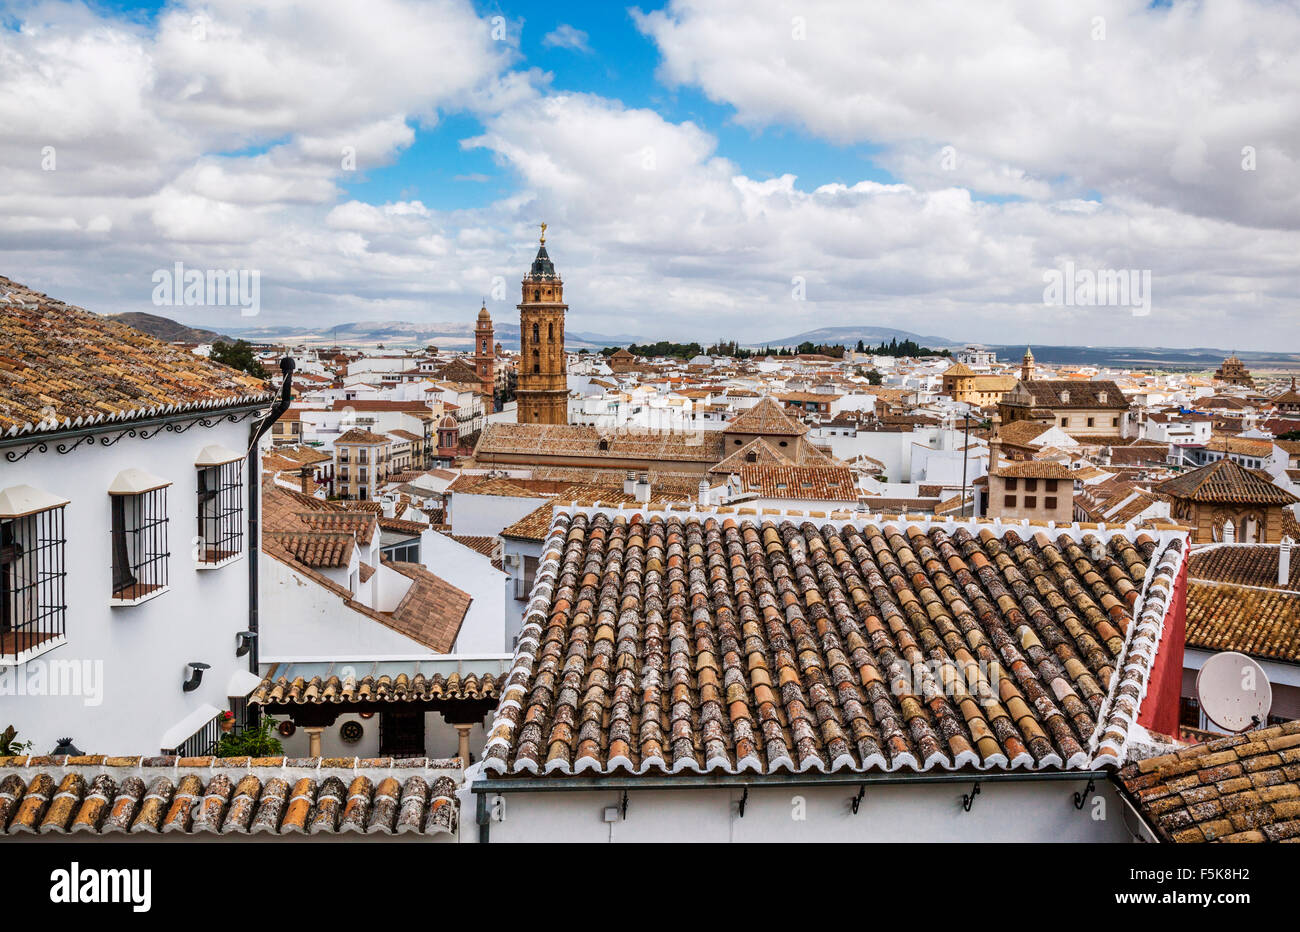 Spain, Andalusia, Province of Malaga, Antequera, view over the roofs of Antequera from the foot of the Alcazaba Stock Photo